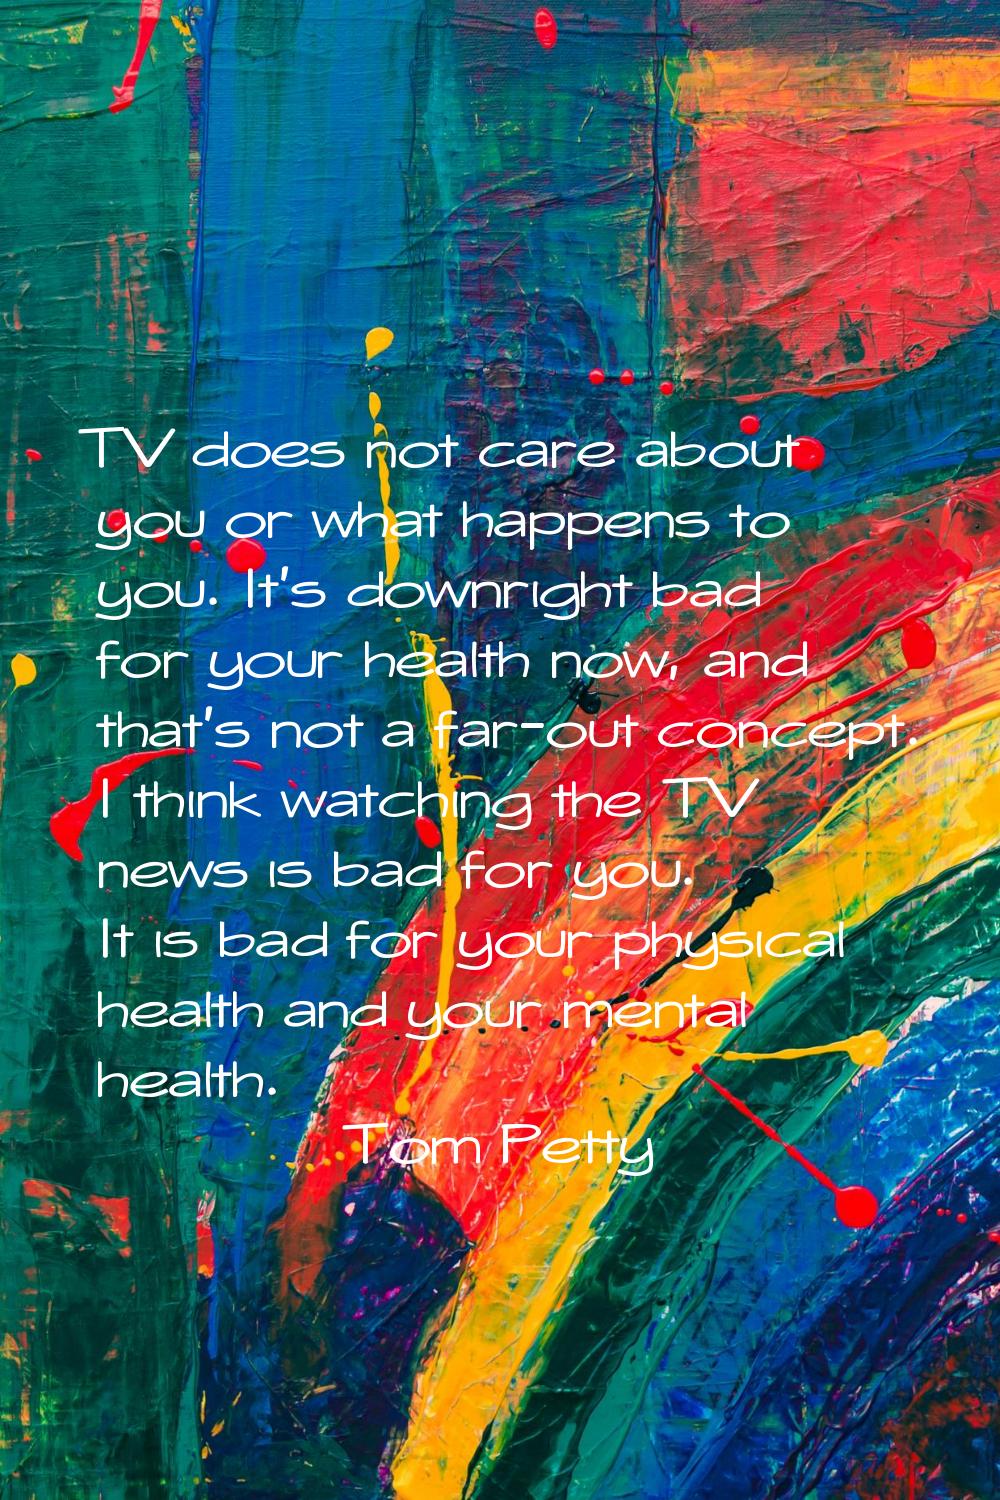 TV does not care about you or what happens to you. It's downright bad for your health now, and that